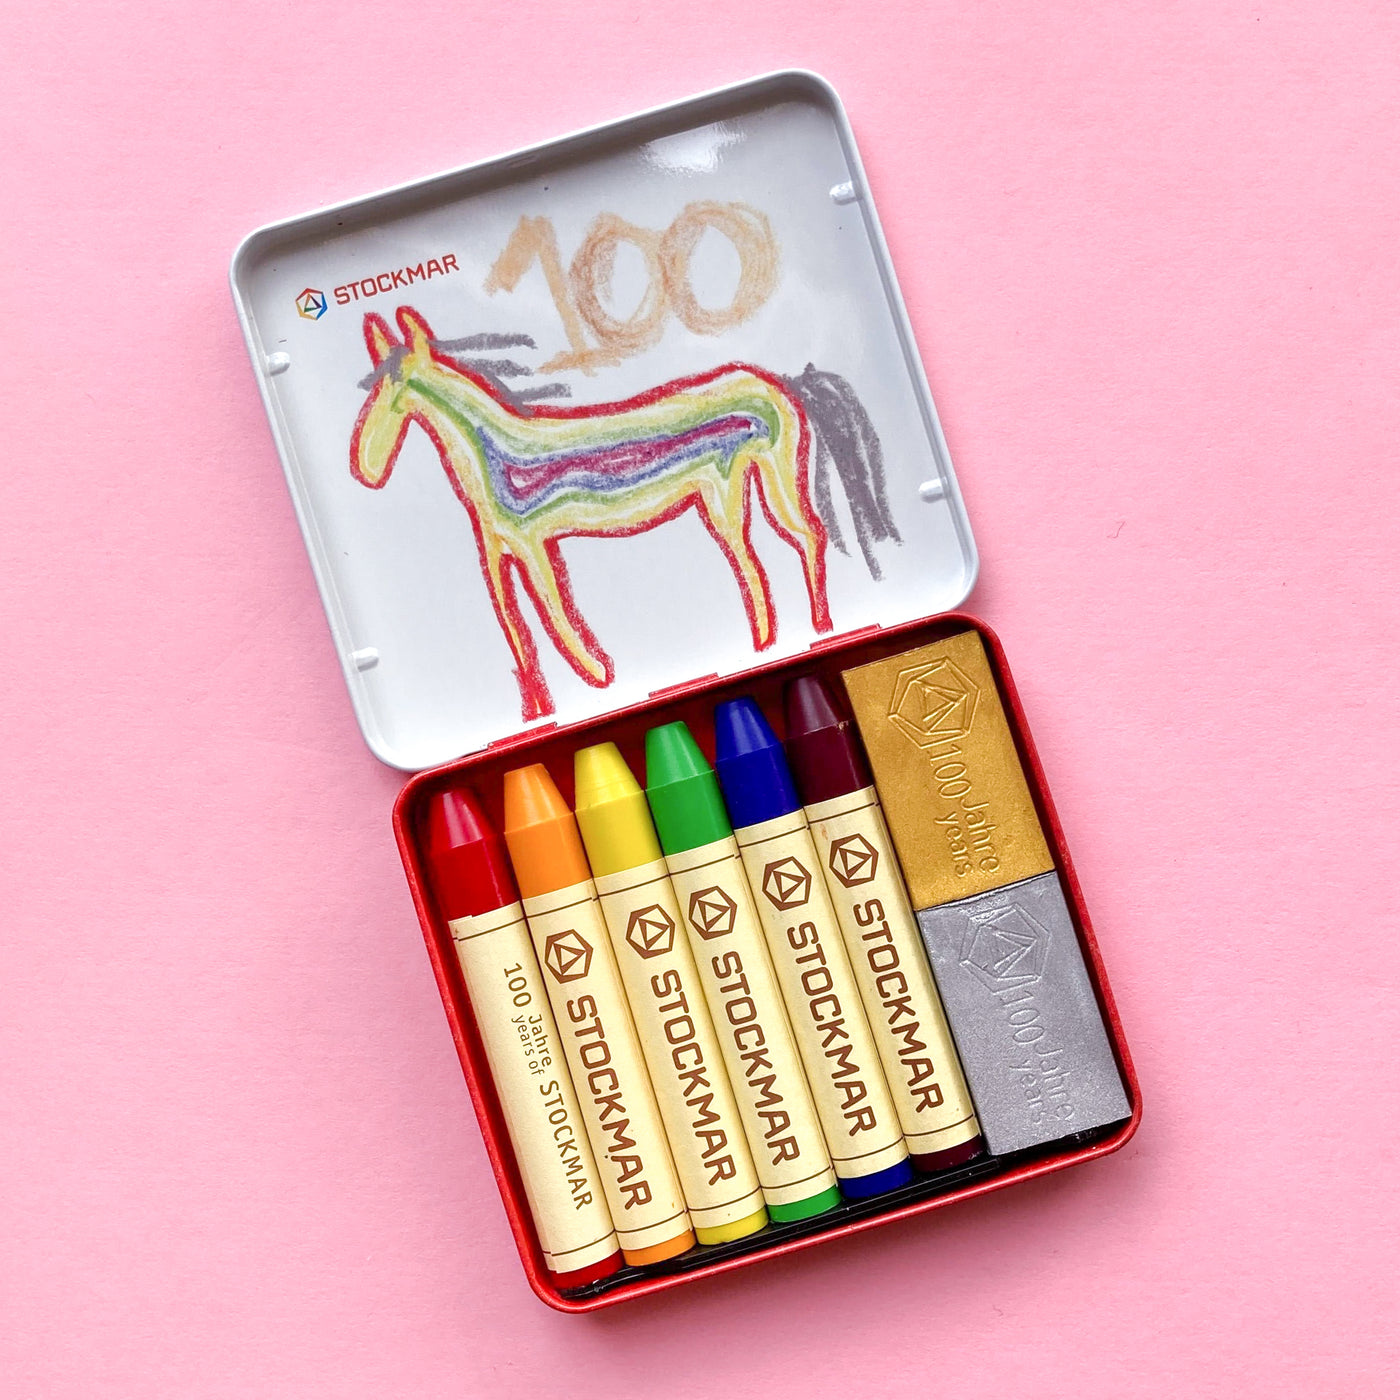 Six stockmar wax stick crayons and two block crayons in a tin case with the colours: carmine red, golden yellow, lemon yellow green, ultramarine, red violet, gold, silver